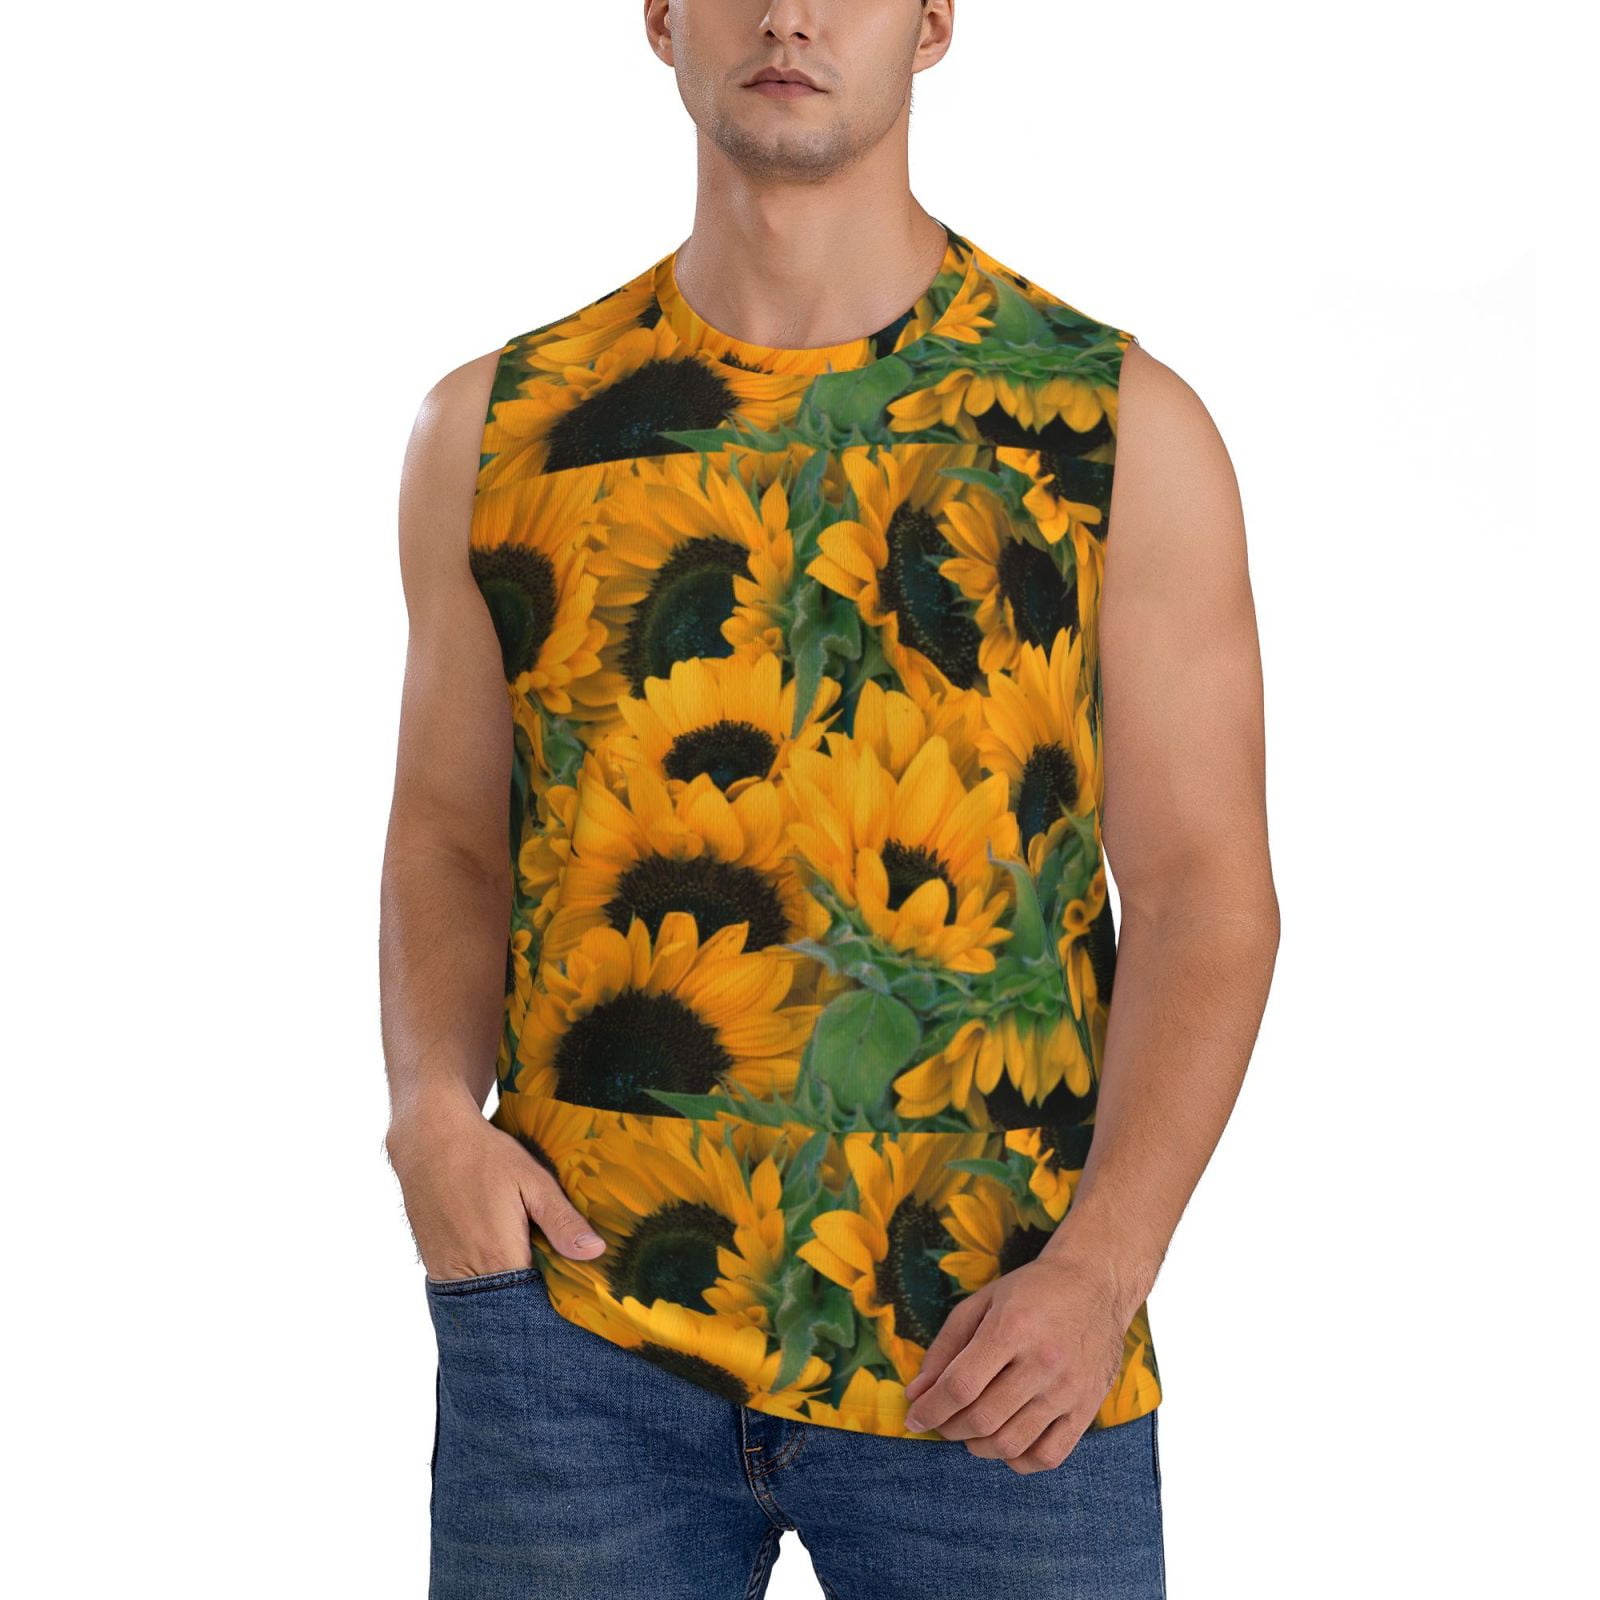 Coaee Sunflowers 7 Men's Sleeveless T-Shirt with Quick Dry for Fitness ...